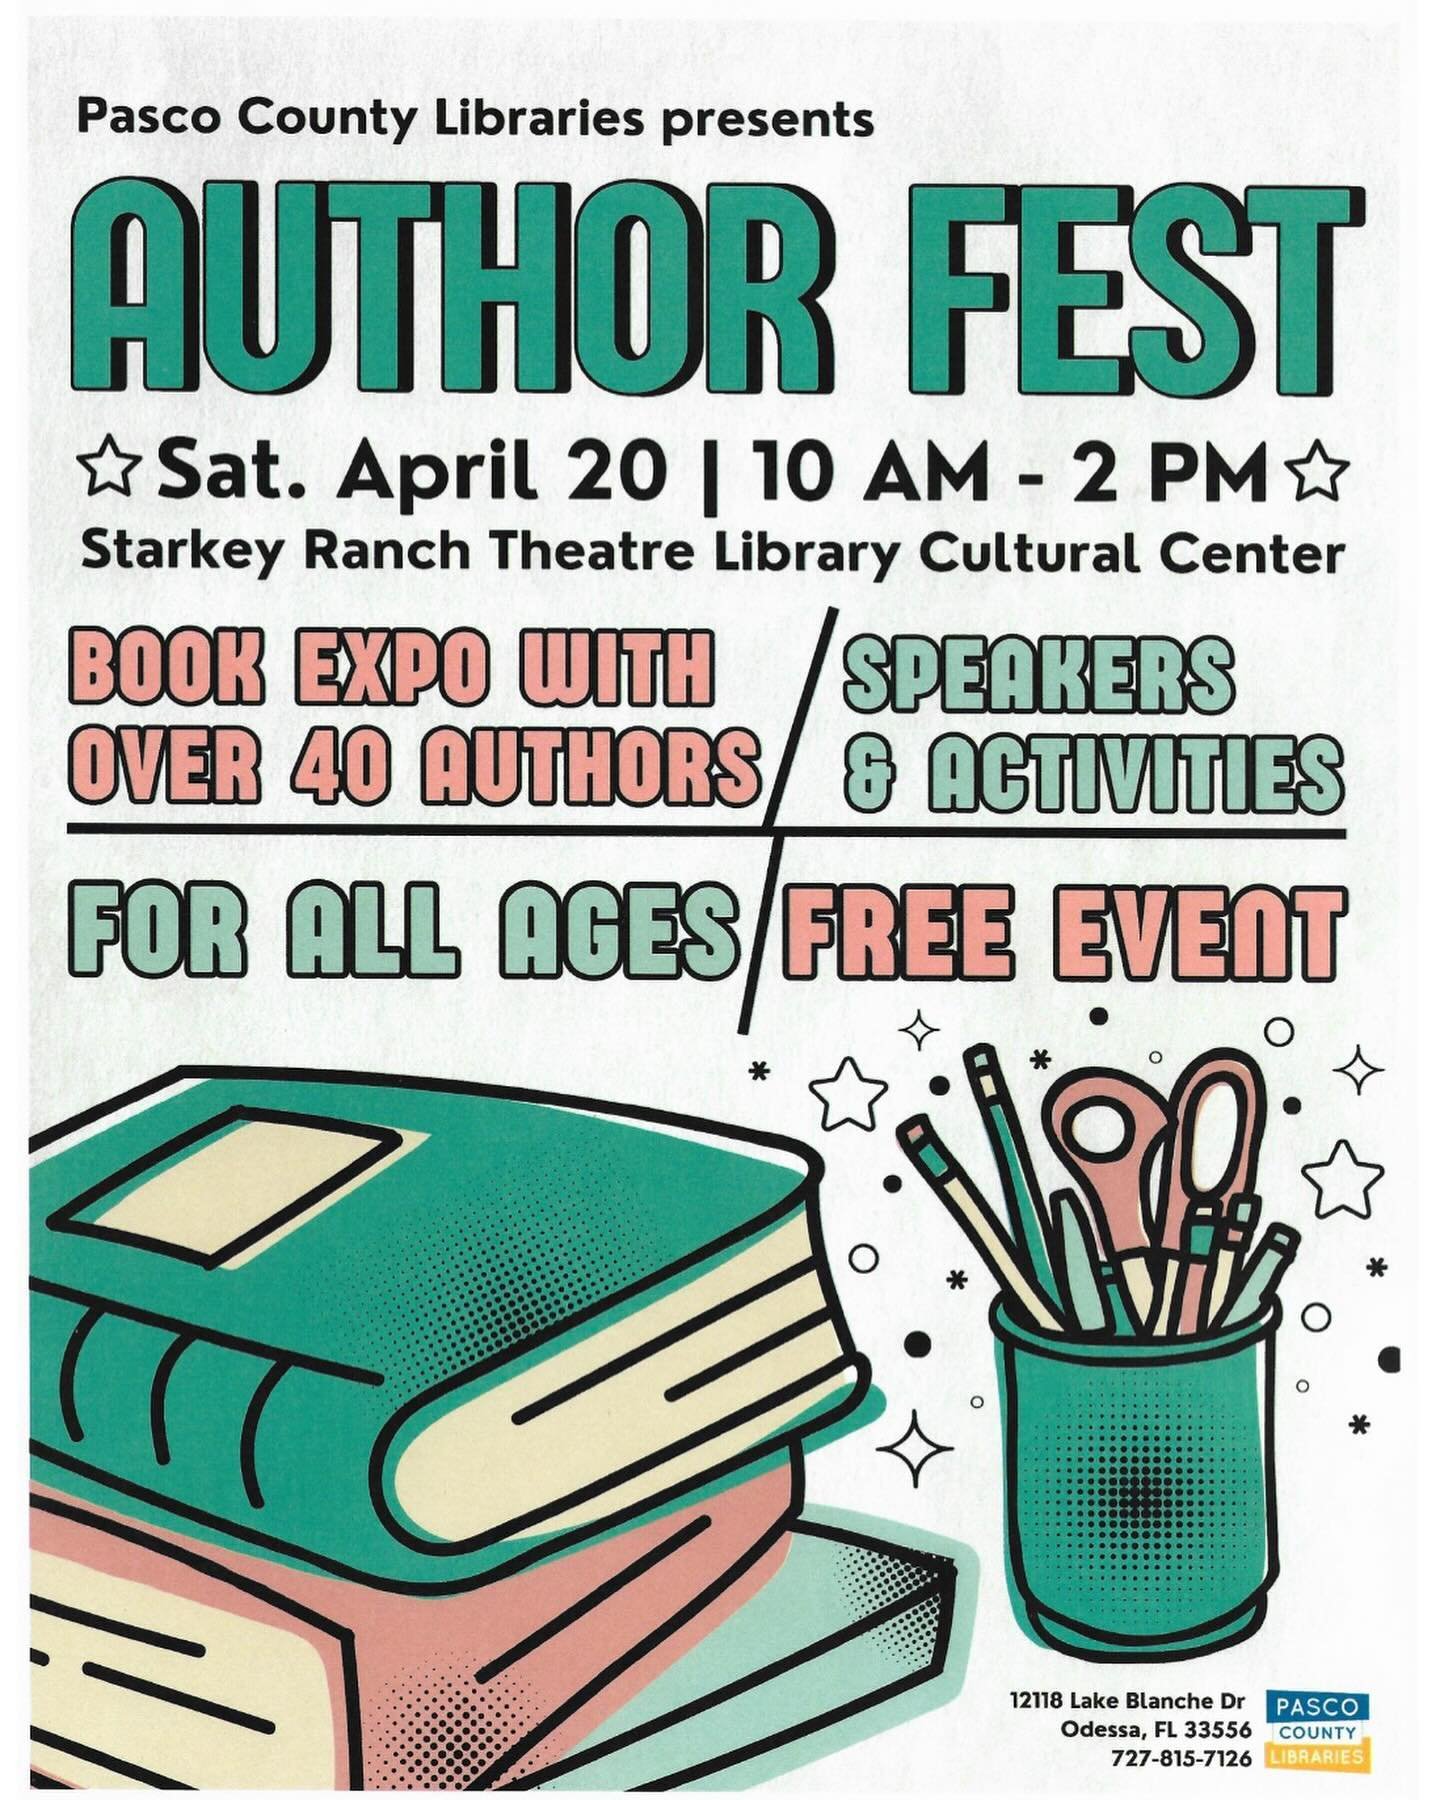 Join me Saturday, April 20th at Author Fest!!! I&rsquo;ll be signing books, giving a presentation, and participating on a fantasy panel! Come see meeeeeeeee! 

#booklovers #bookstagram #flreader #pasco #pascocountyfl #tampa #tampabayteachers #pascote